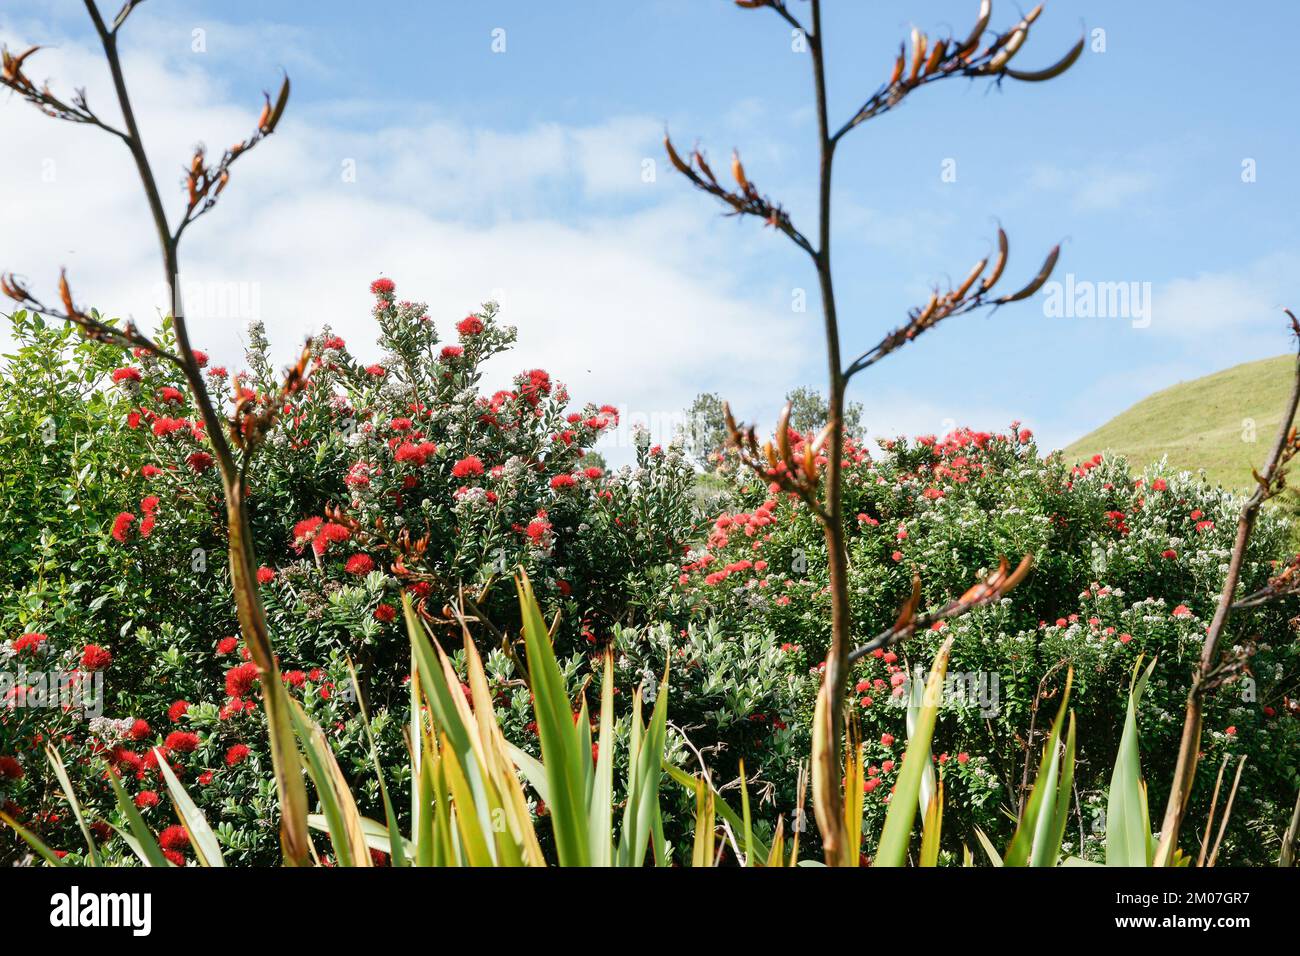 Red pohutukawa flowering tree behind flax and flax flower stem nature background. Stock Photo